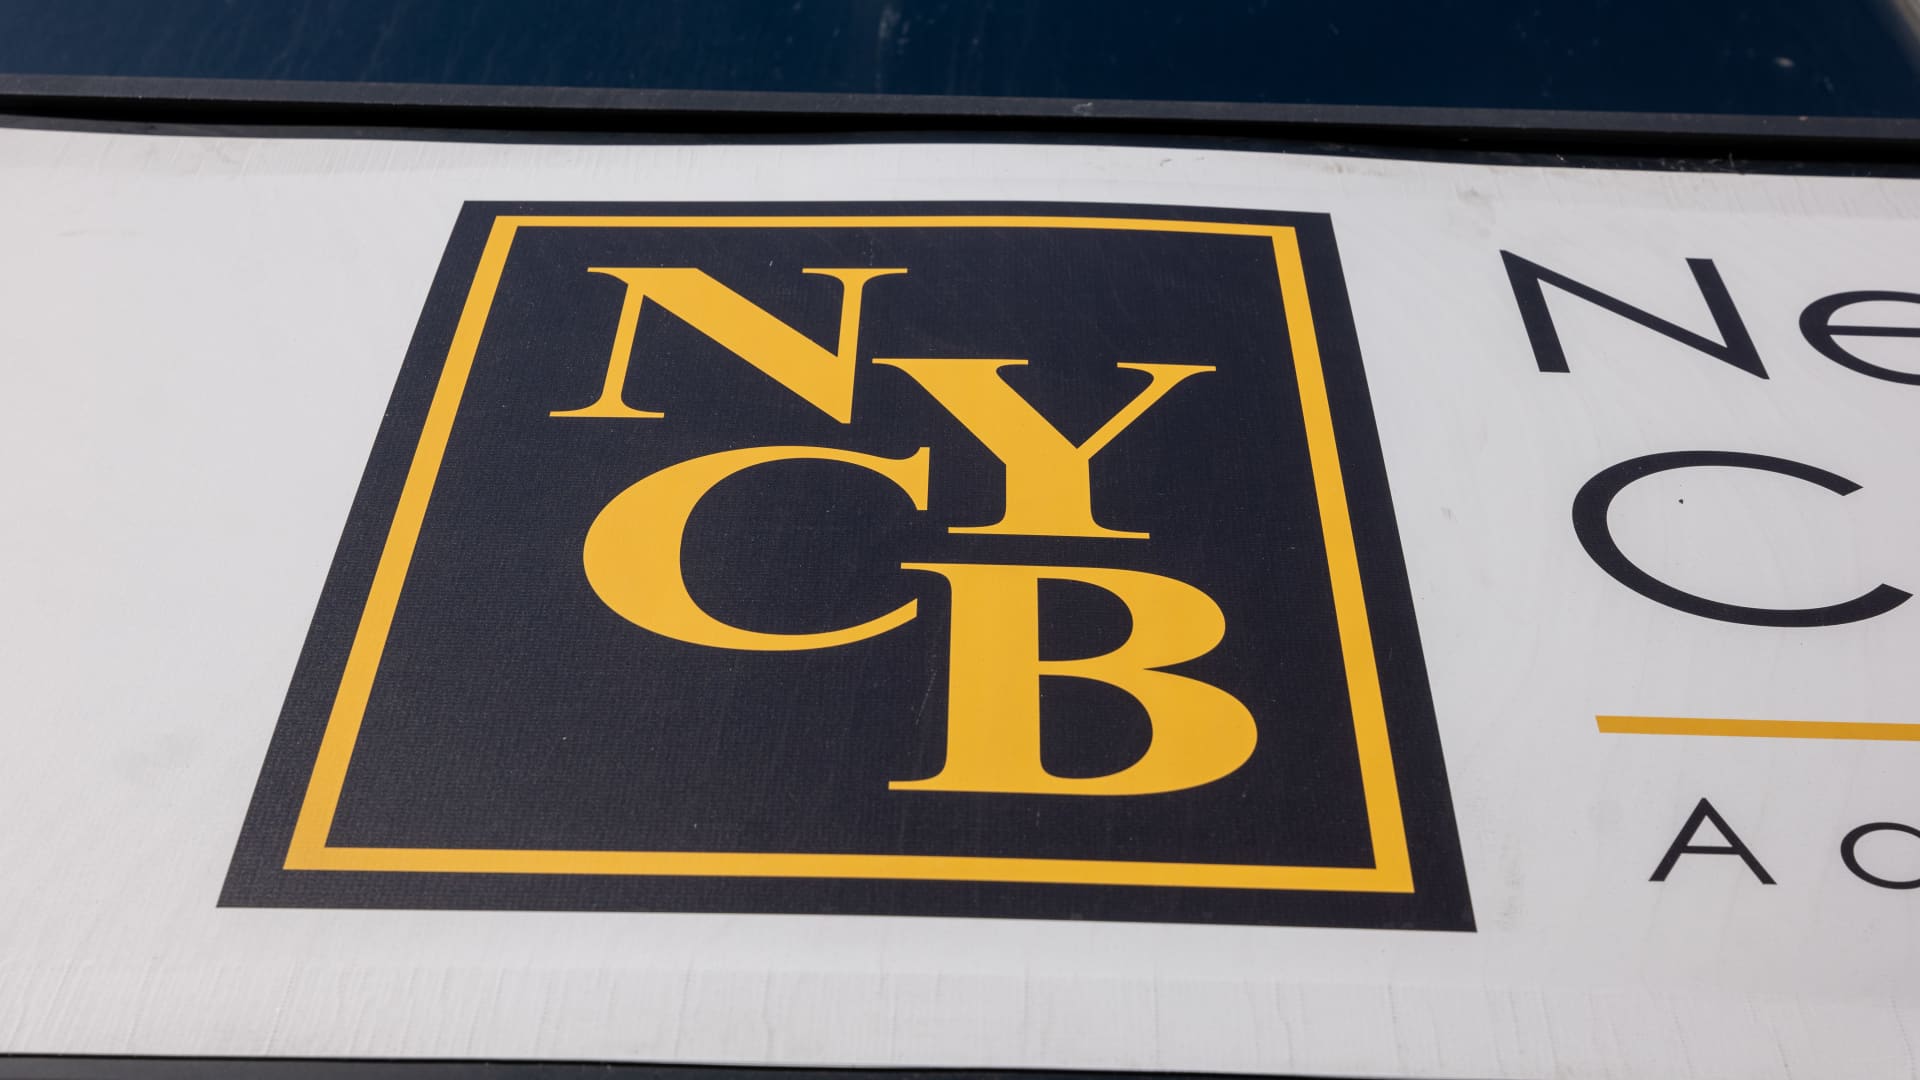 Shares of NYCB fall 18% after bank discloses ‘internal controls’ issue, CEO change